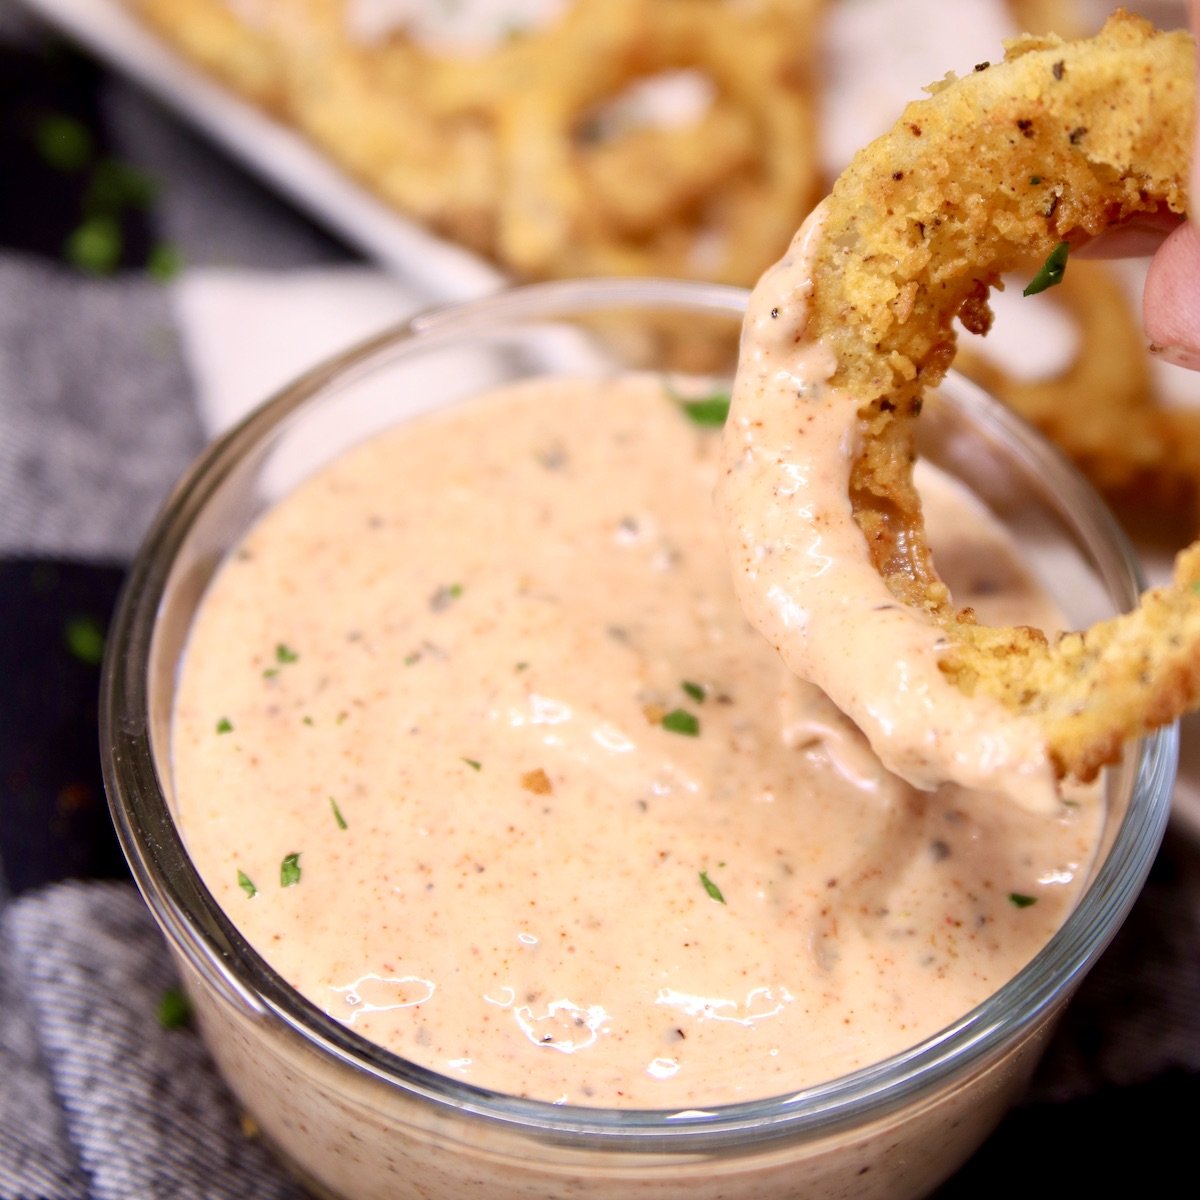 Best Sauces for Onion Rings